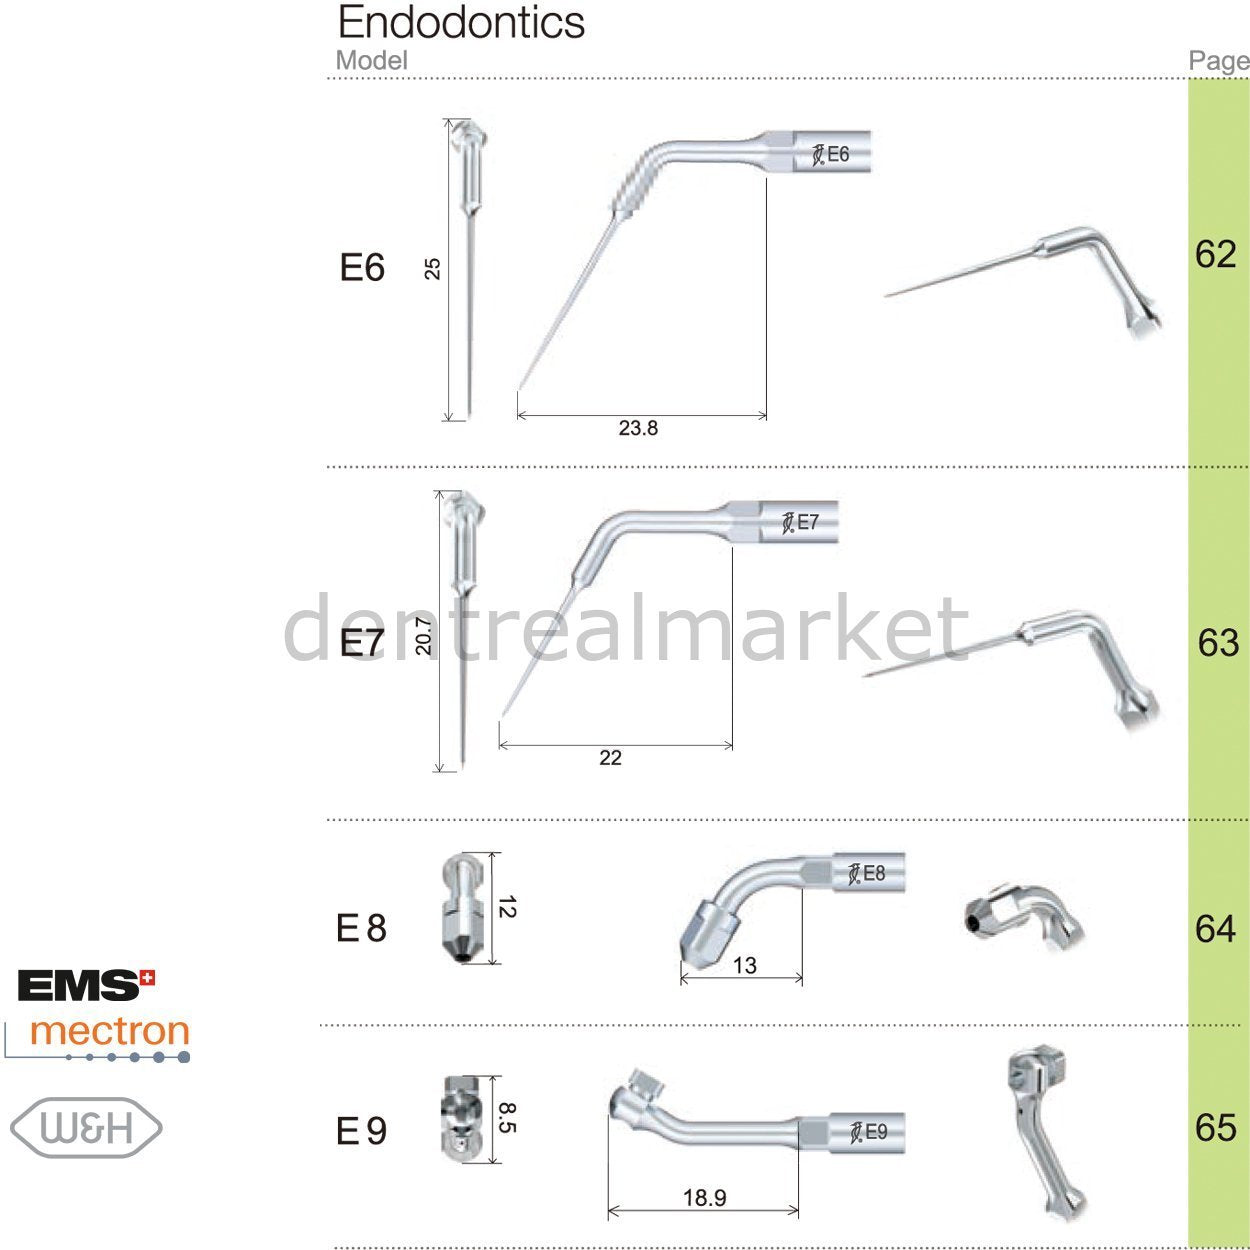 DentrealStore - Woodpecker Endodontic Scaler Tips - Ems,Mectron,Woodpecker,WH Compatible